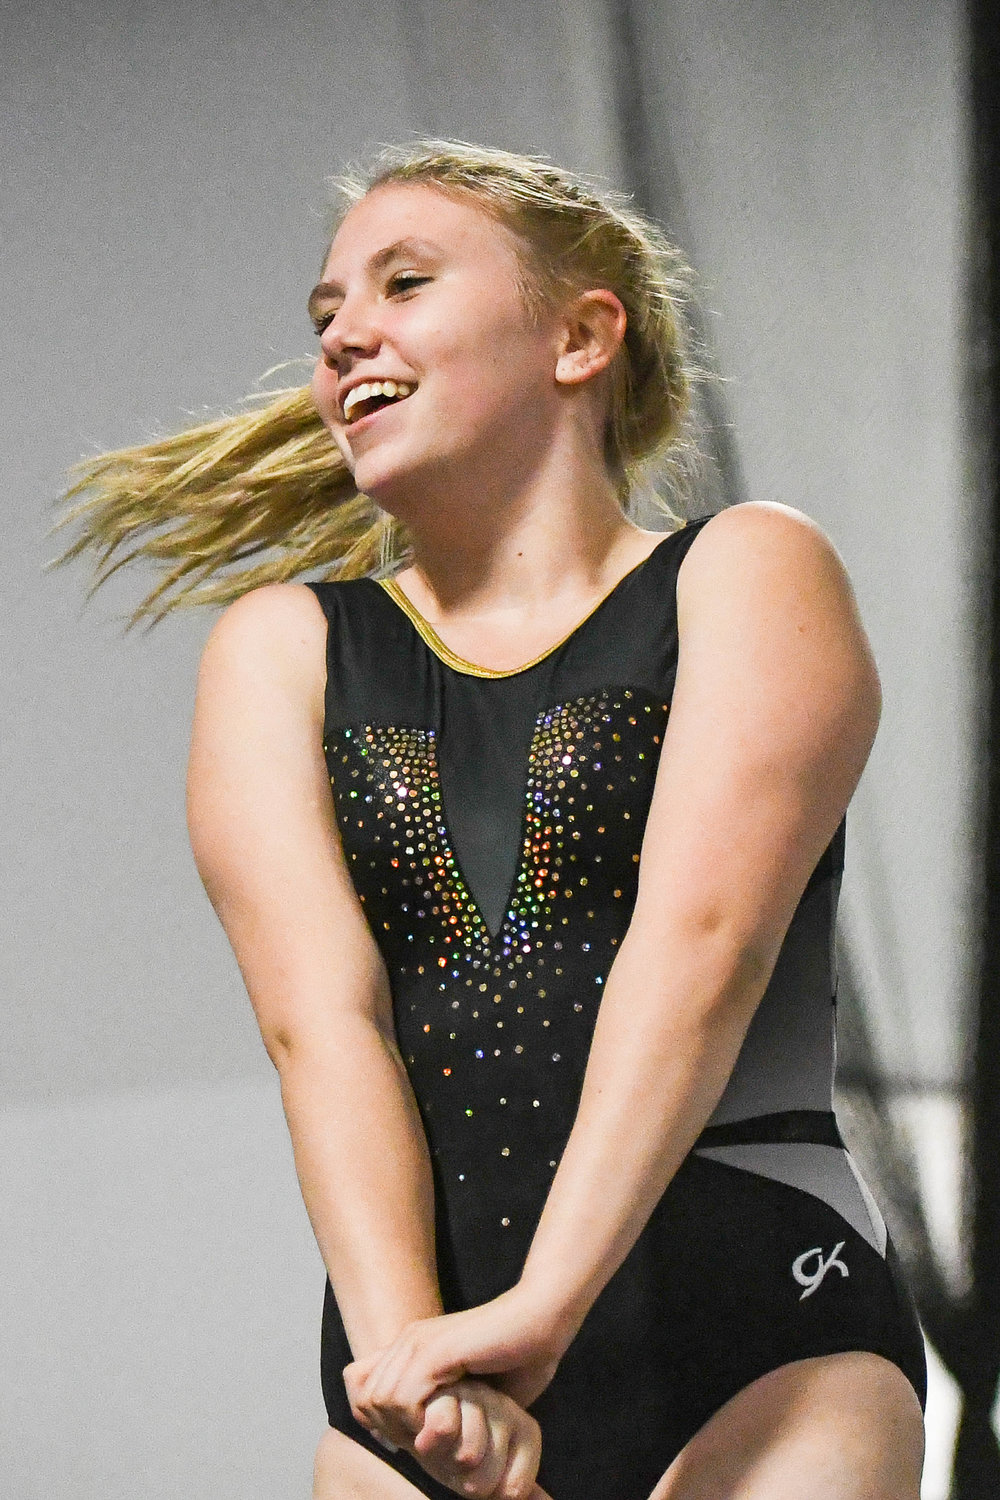 Rome Free Academy's Kyley Kuehnert smiles at her coach before competing in gymnastics on Thursday at Valley Gymnastics in Utica.